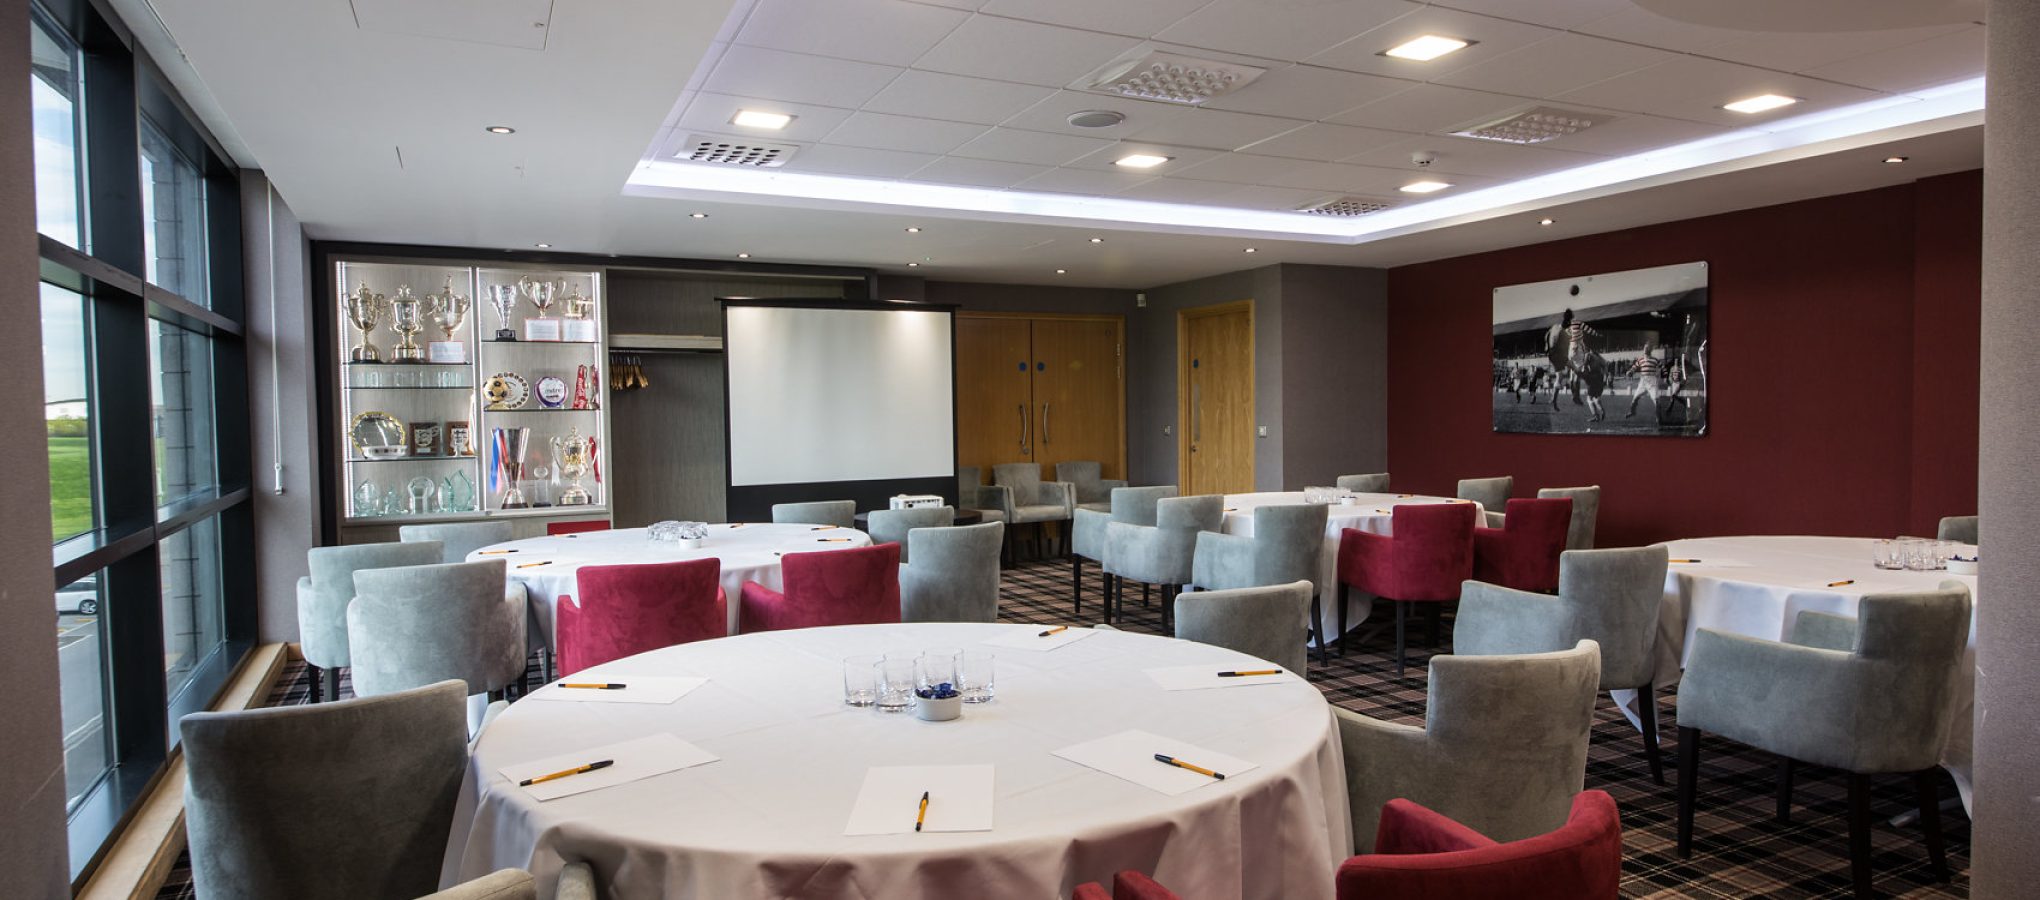 Doncaster Function Rooms - Eco-Power Stadium (Doncaster Rovers FC)